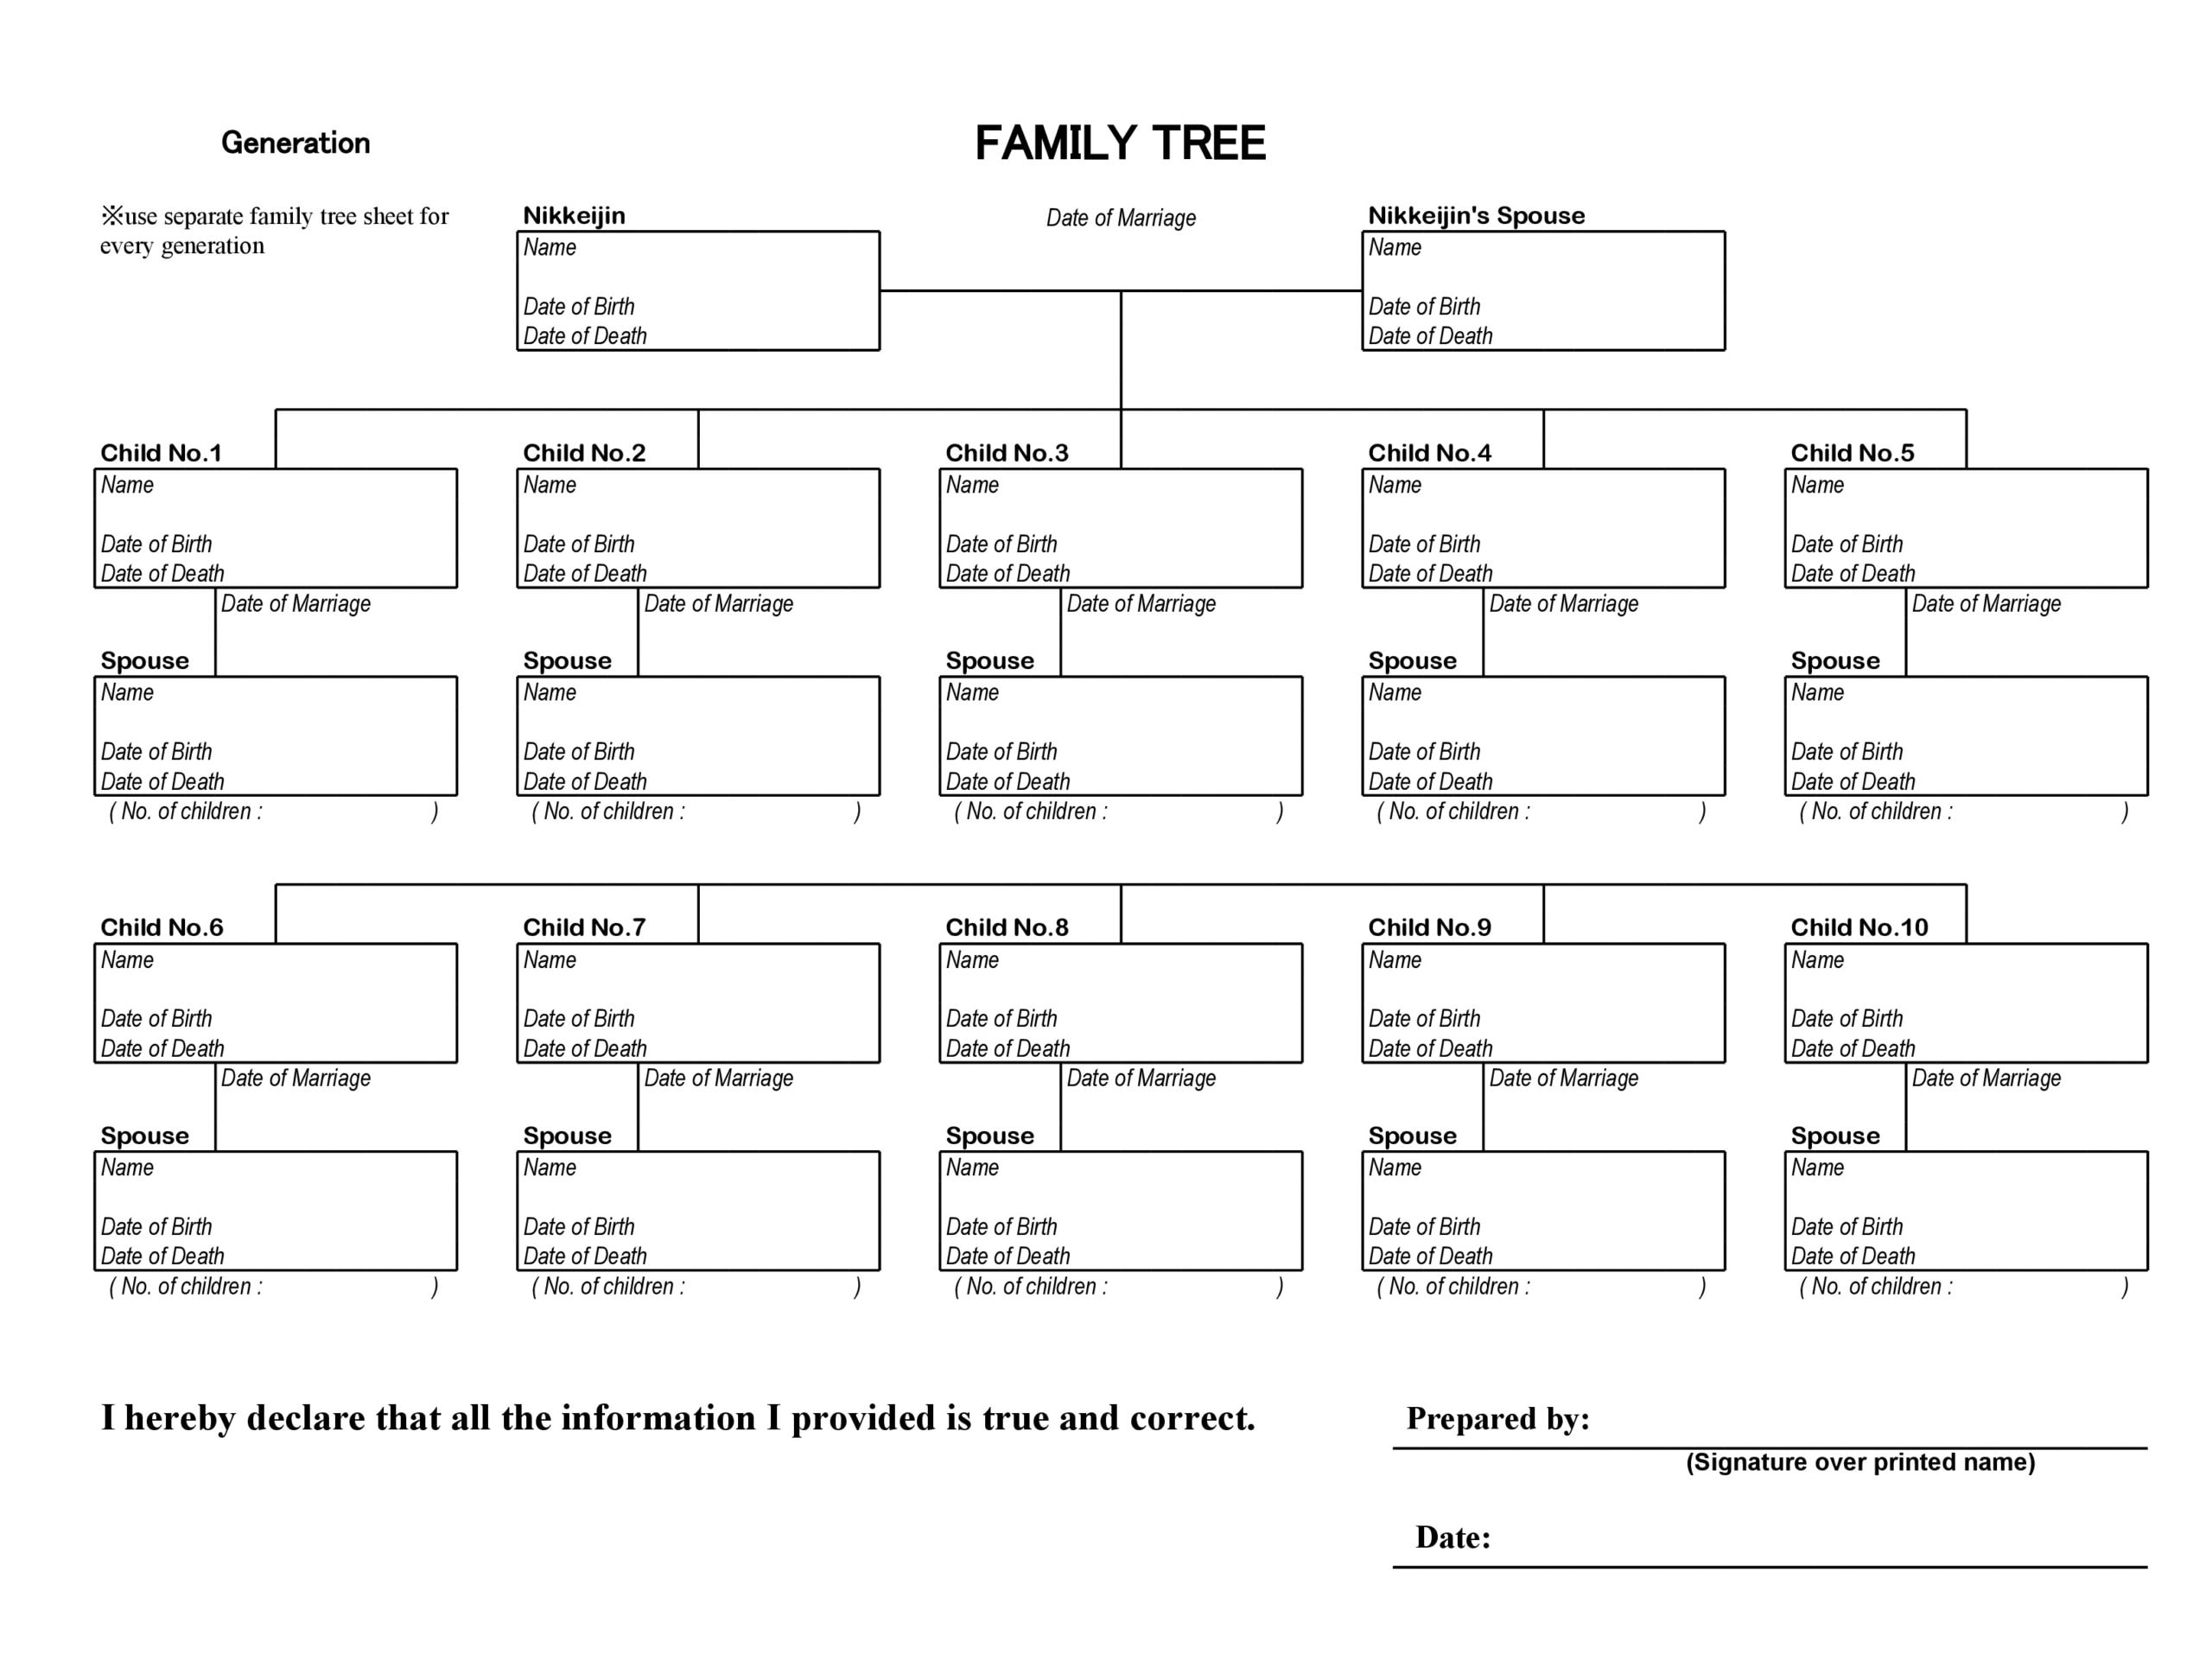 30 editable family tree templates 100 free templatearchive